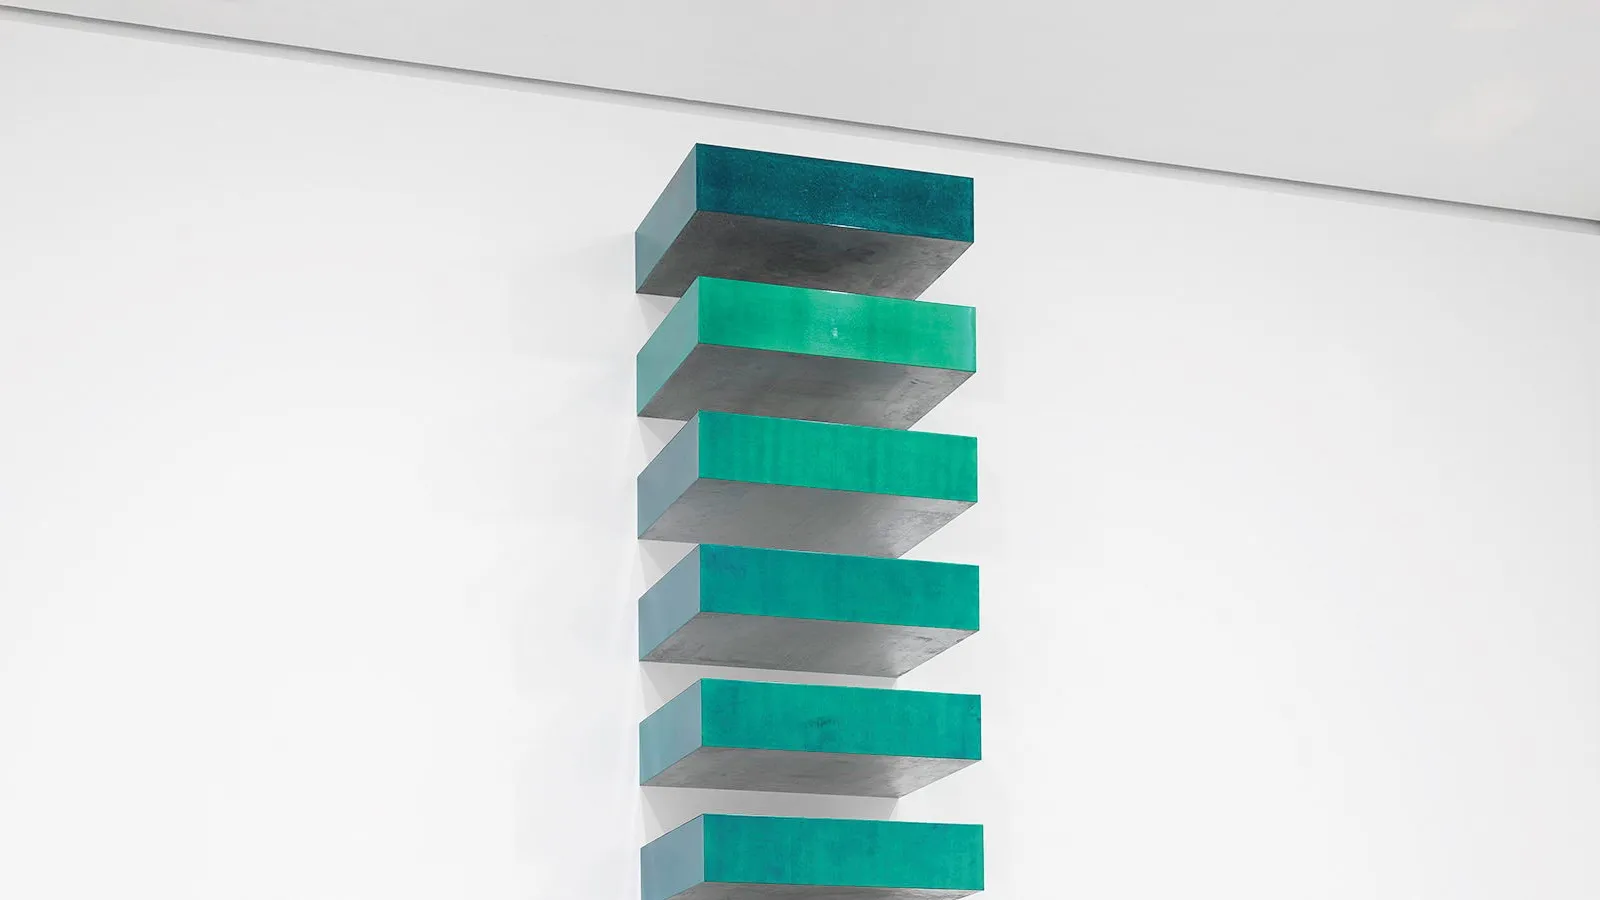 Judd's Untitled (Stack), here in blue-teal, remains his most influential work